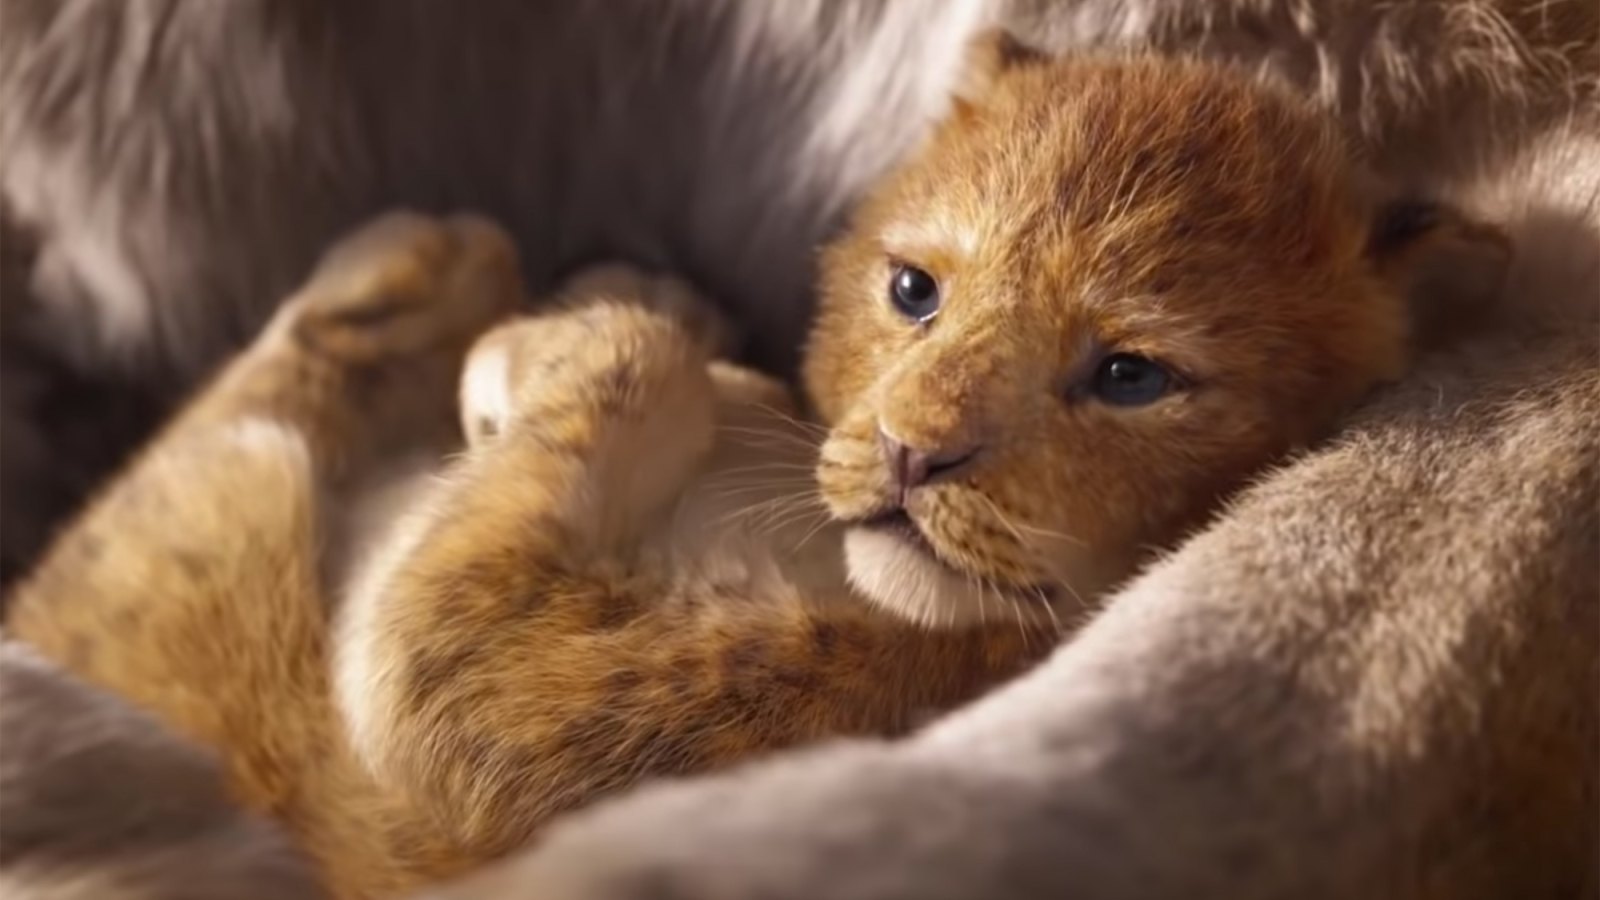 'The Lion King' Live-Action Movie's First Trailer Is Gorgeous and Goosebump-Inducing